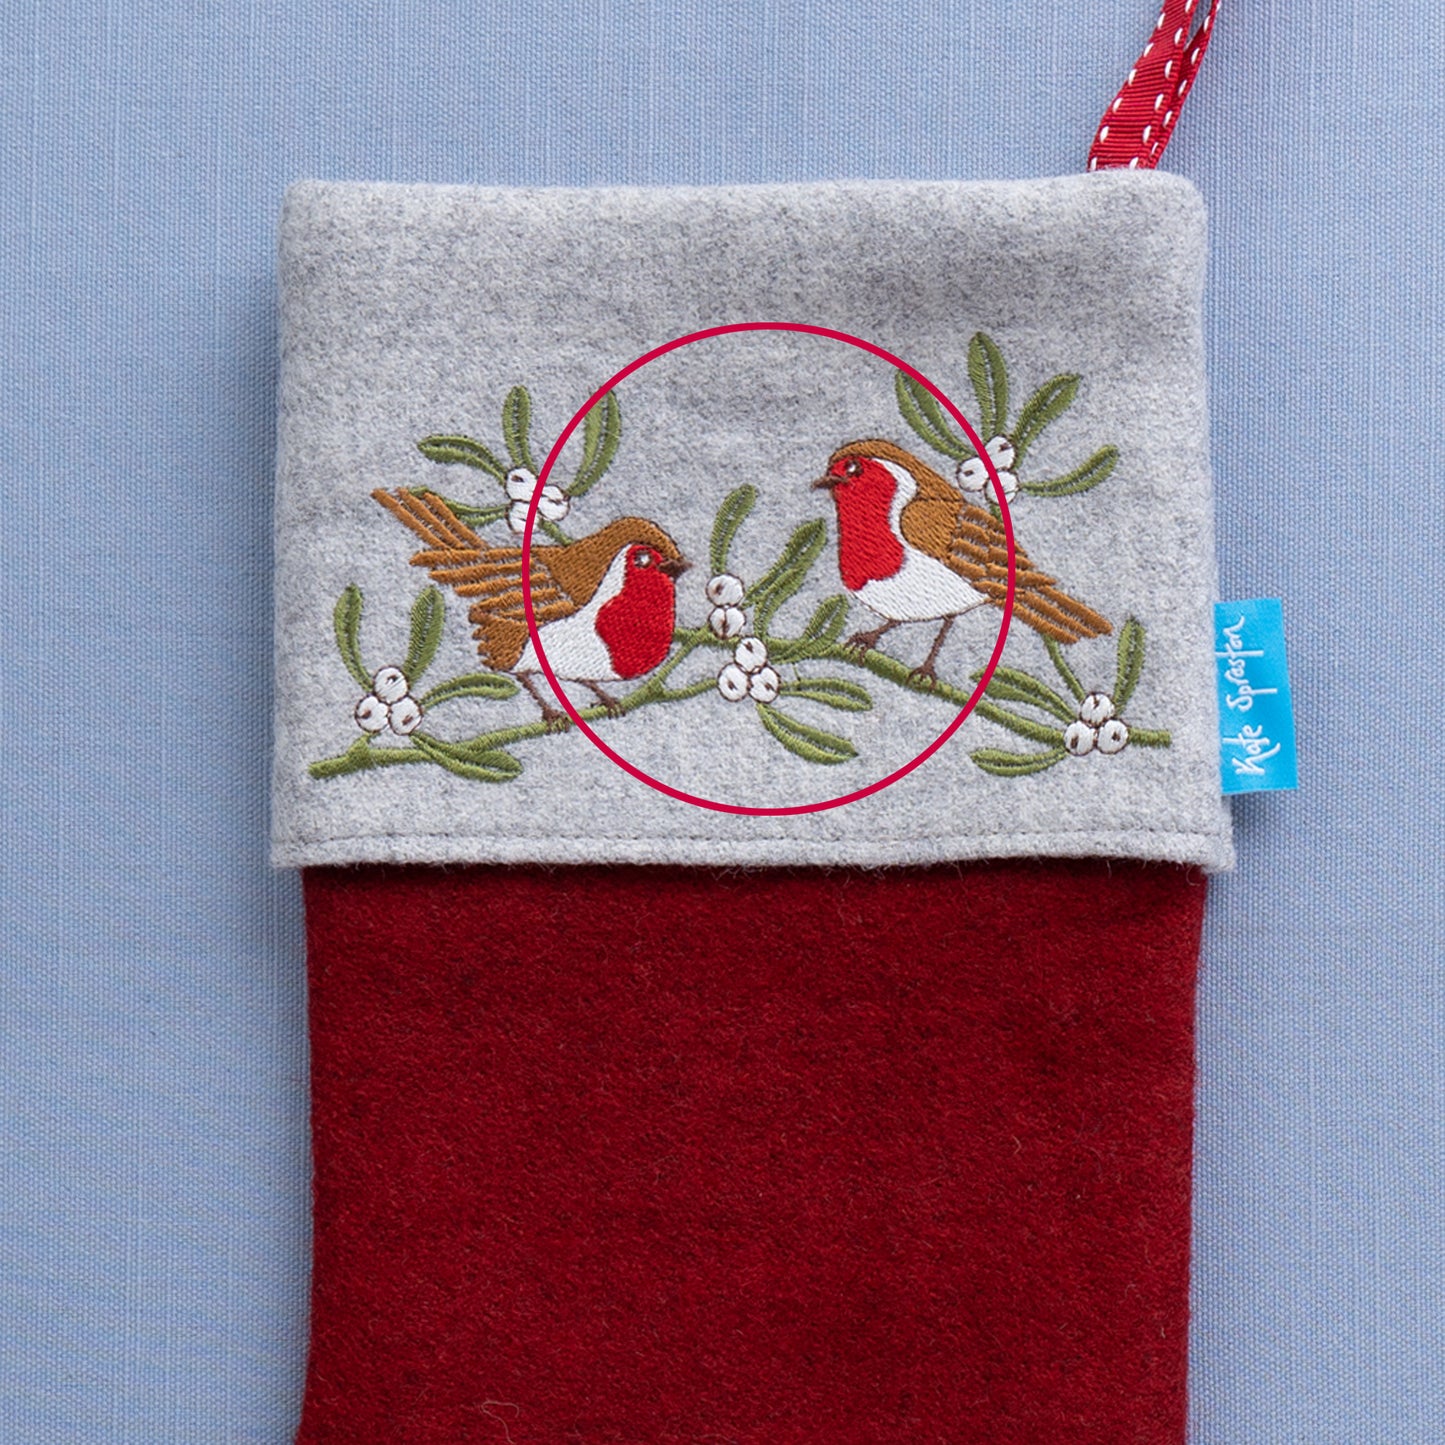 Second - Embroidered Robin and Mistletoe Christmas Stocking - Large - Missing Detail